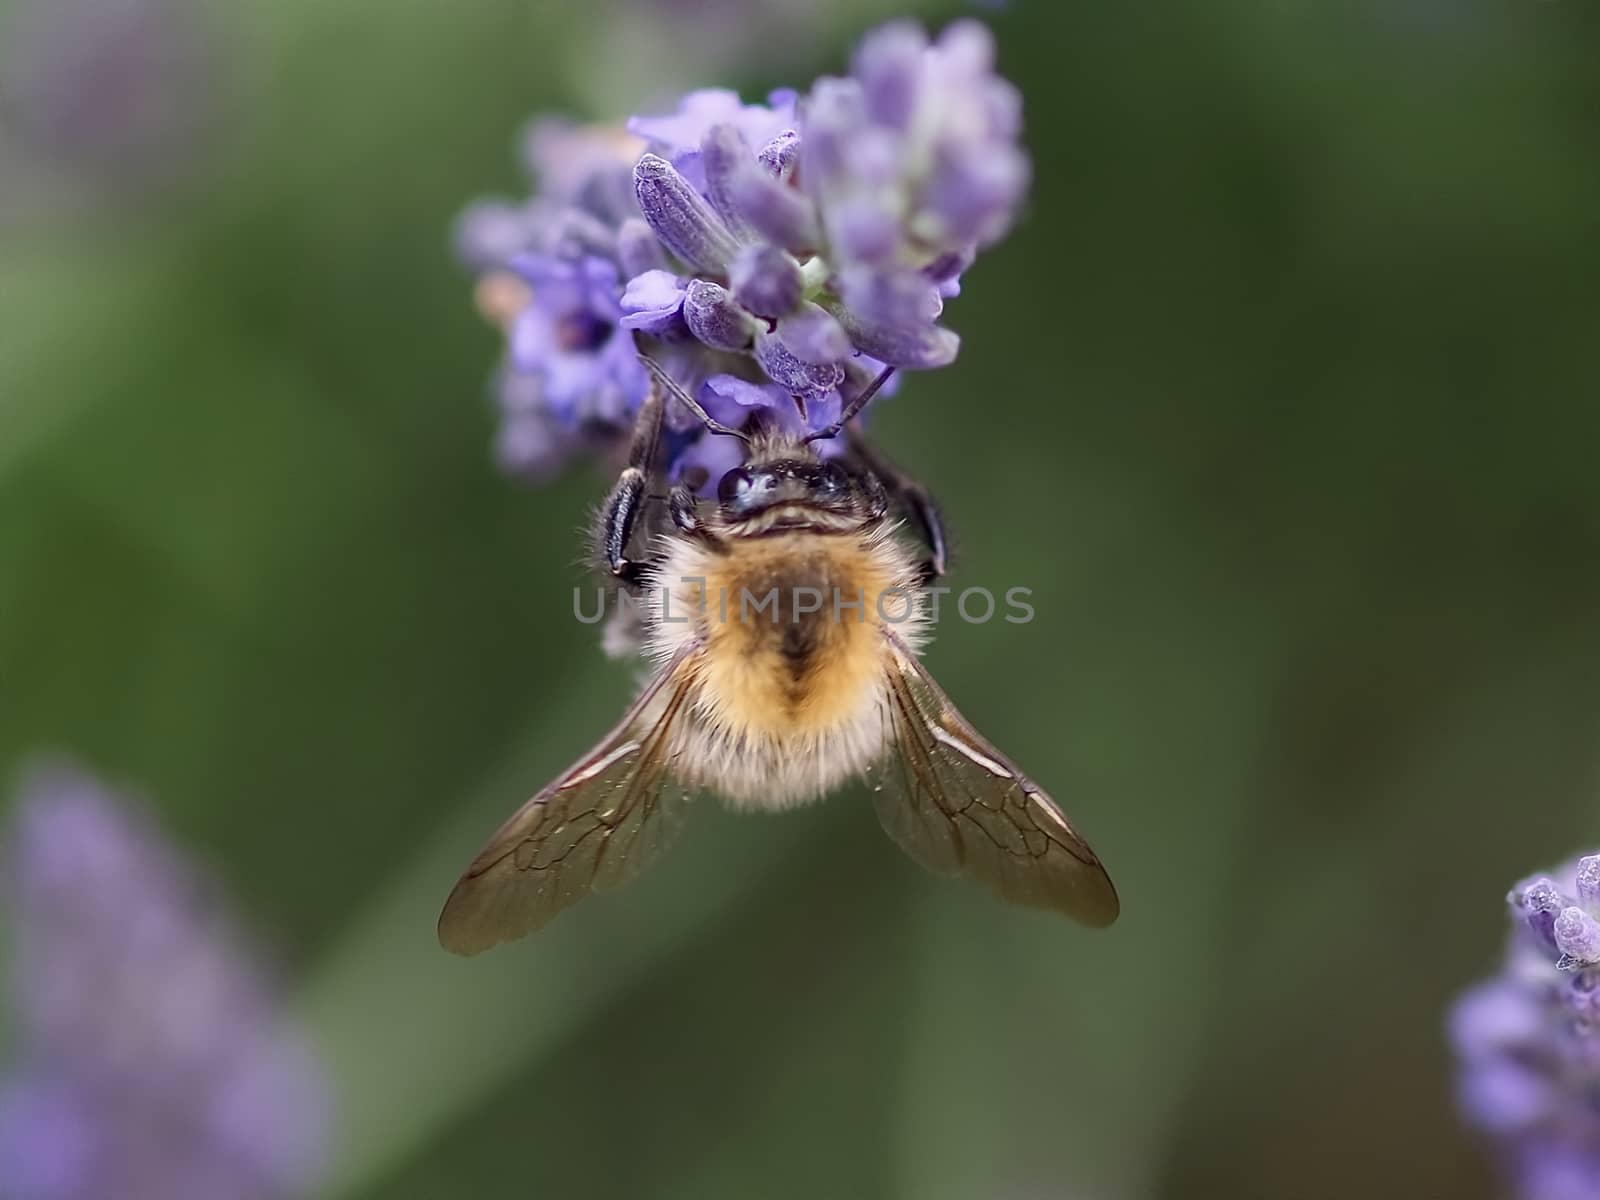 Closeup of a humble bee on a purple lavender flower by Stimmungsbilder